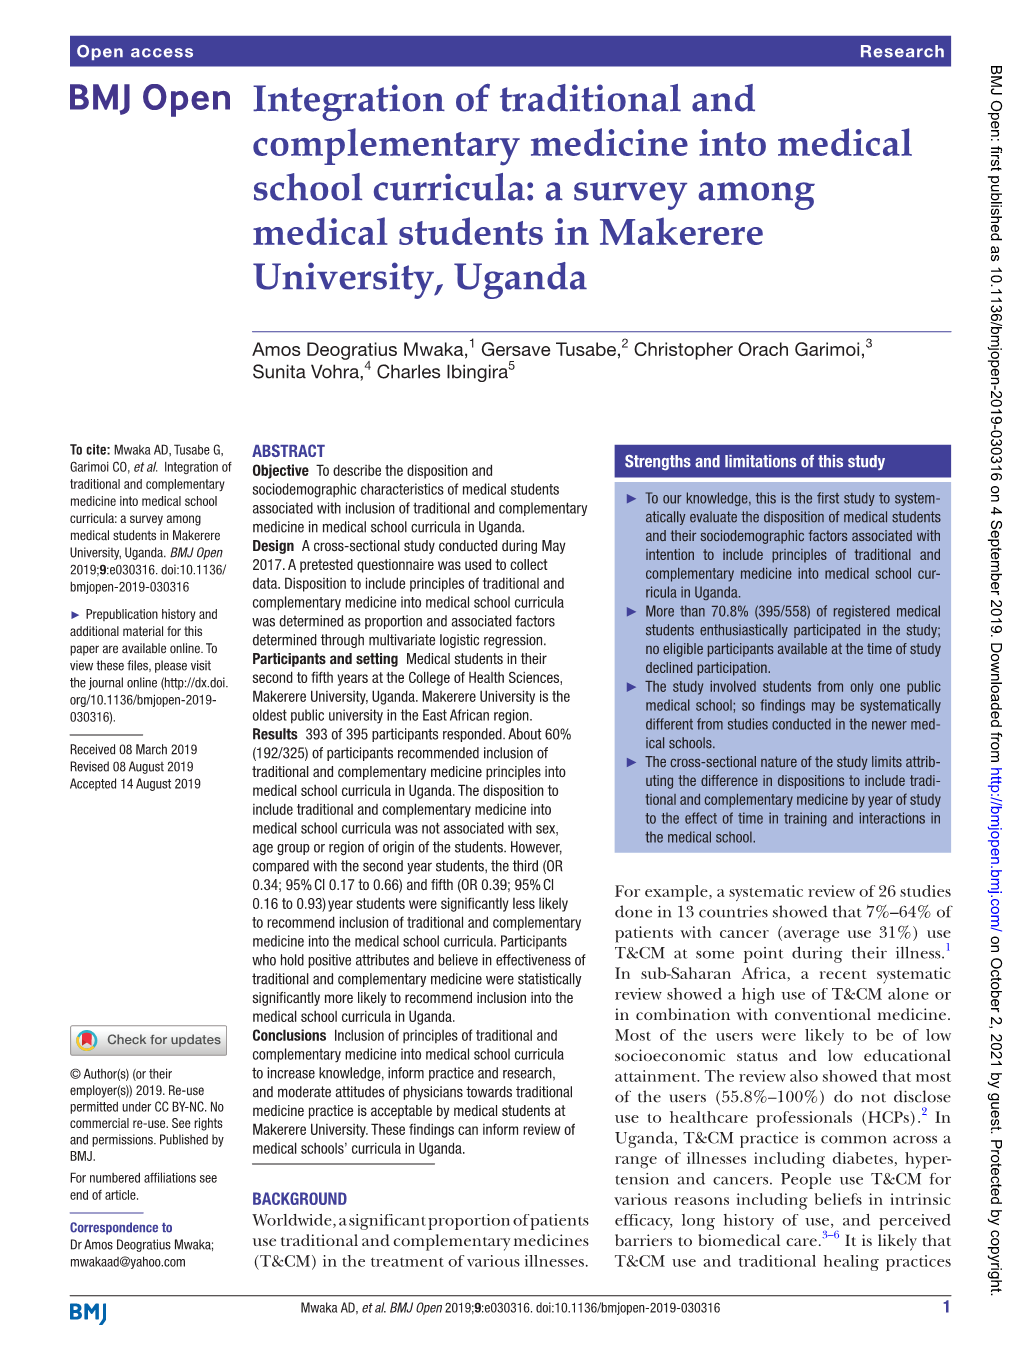 Integration of Traditional and Complementary Medicine Into Medical School Curricula: a Survey Among Medical Students in Makerere University, Uganda